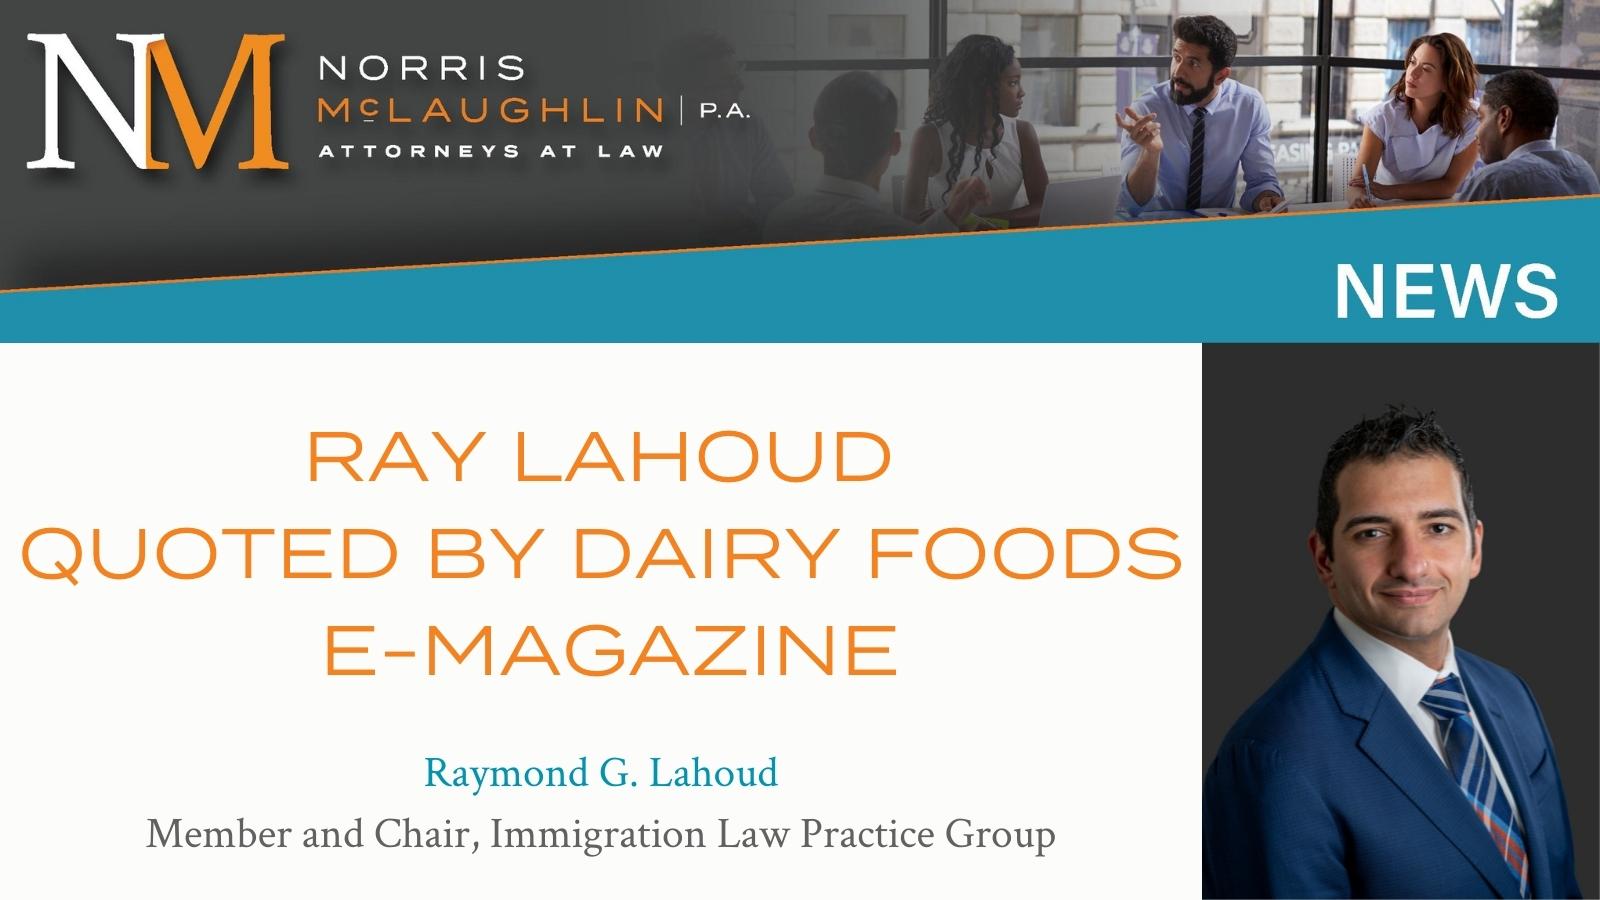 Ray Lahoud Quoted by Dairy Foods E-Magazine